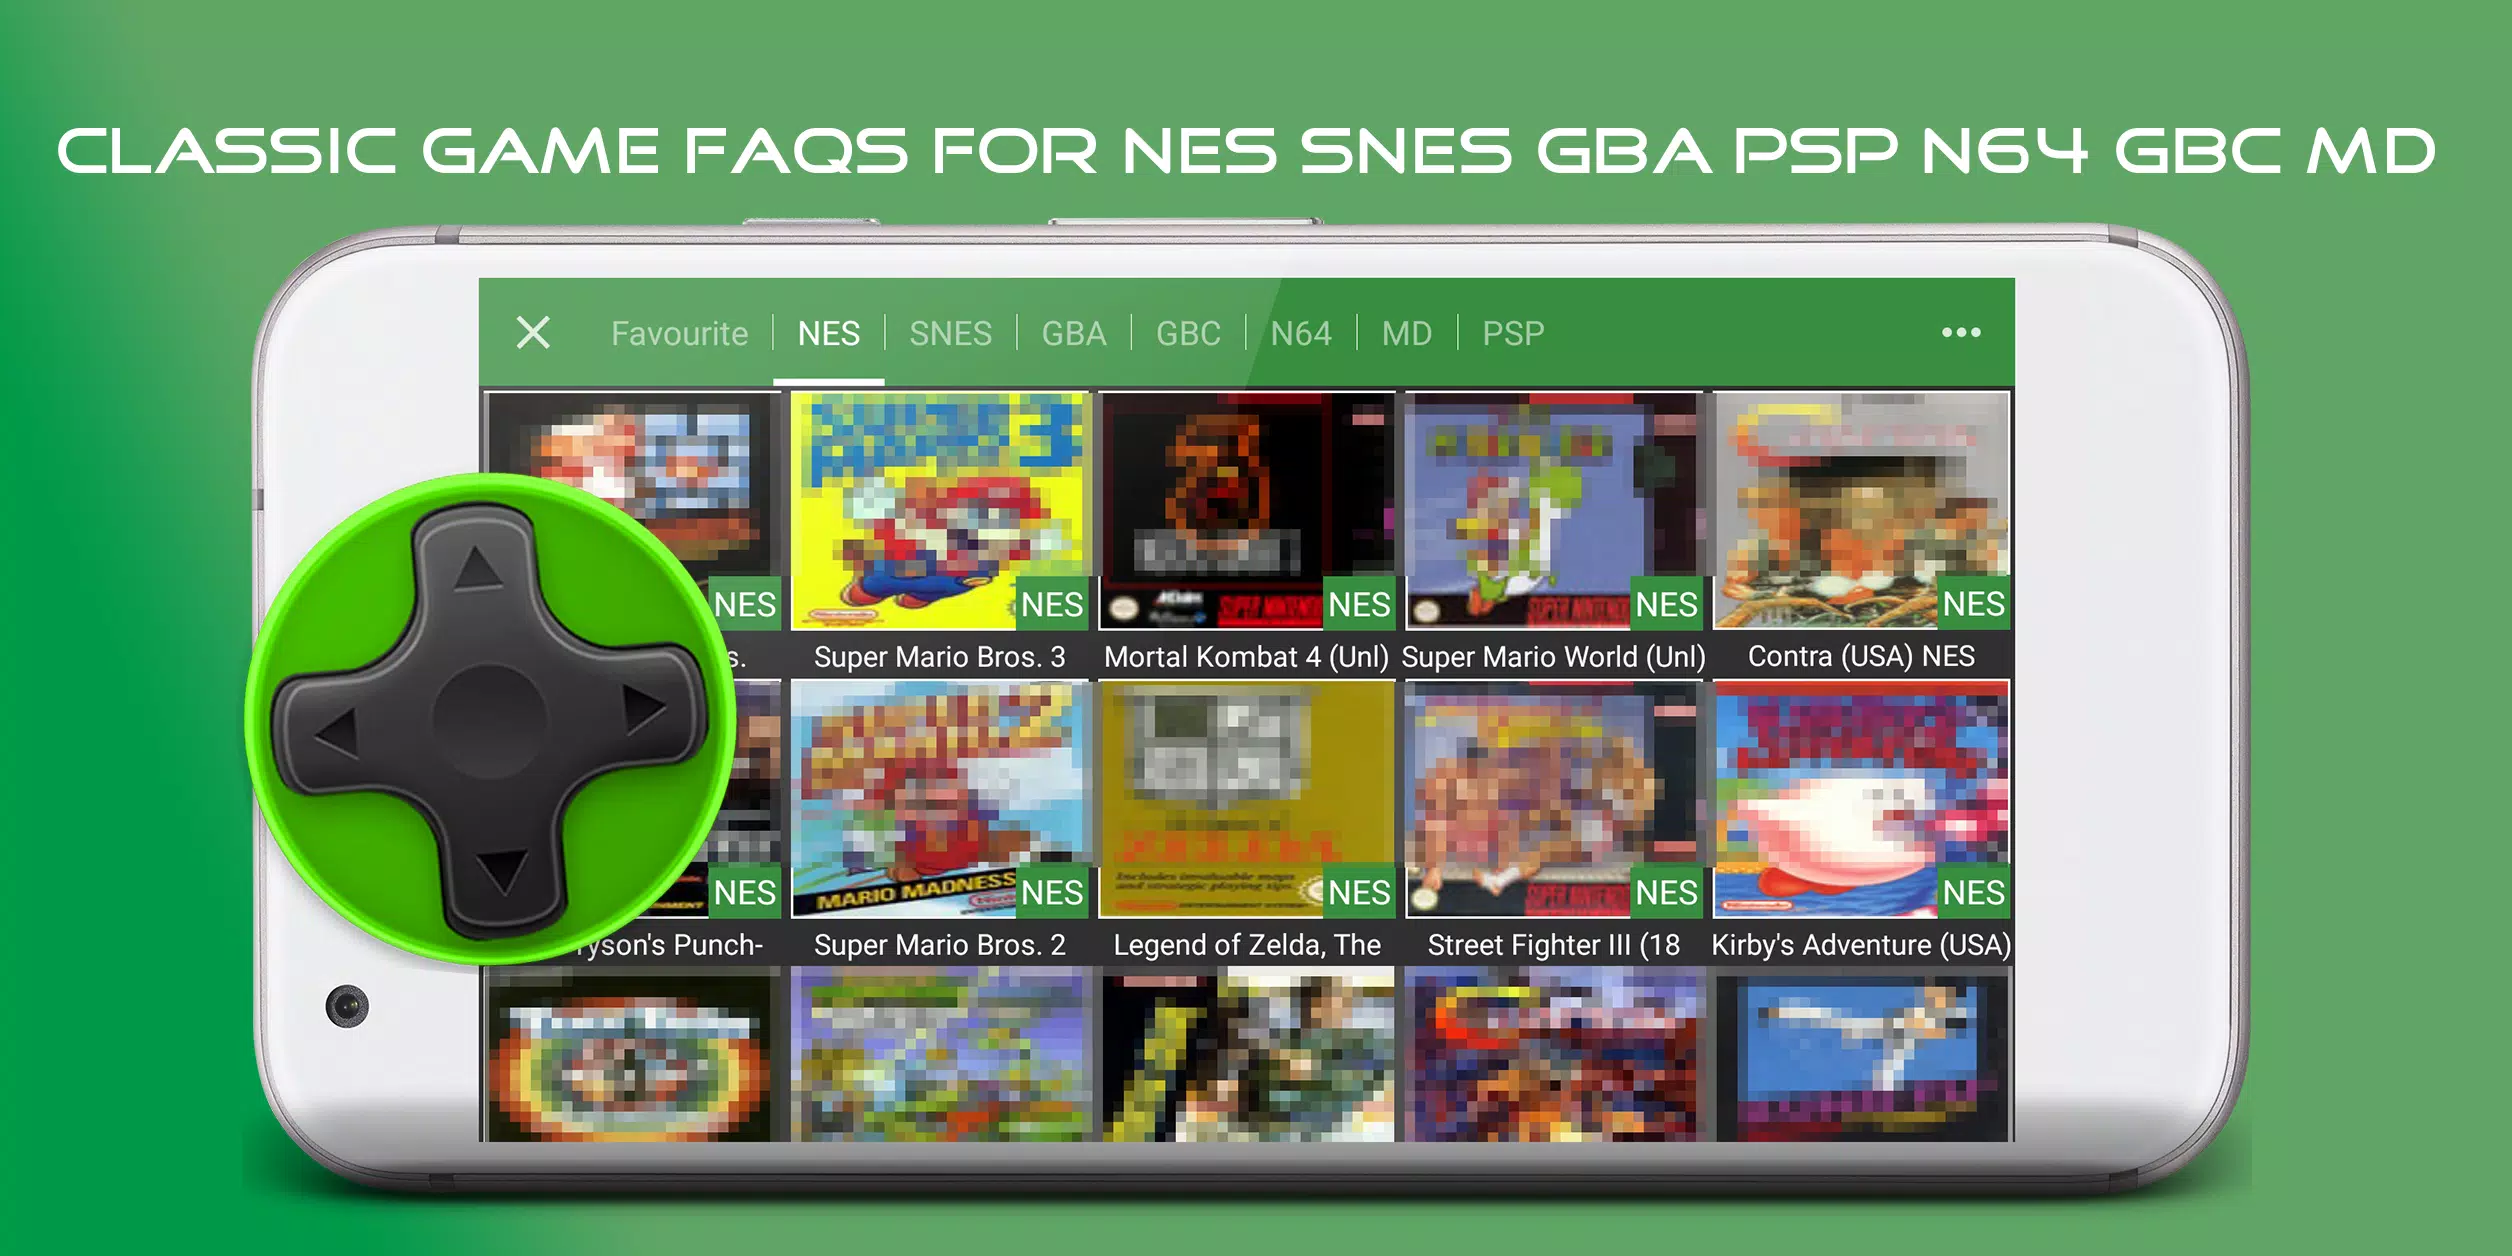 gfs_14052_1_2 -  - Featured Video Game ROMs and ISOs, Game  Database for GBA, N64, Wii, SEGA, PSX, PSP, NES, SNES, 3DS, GBC and More